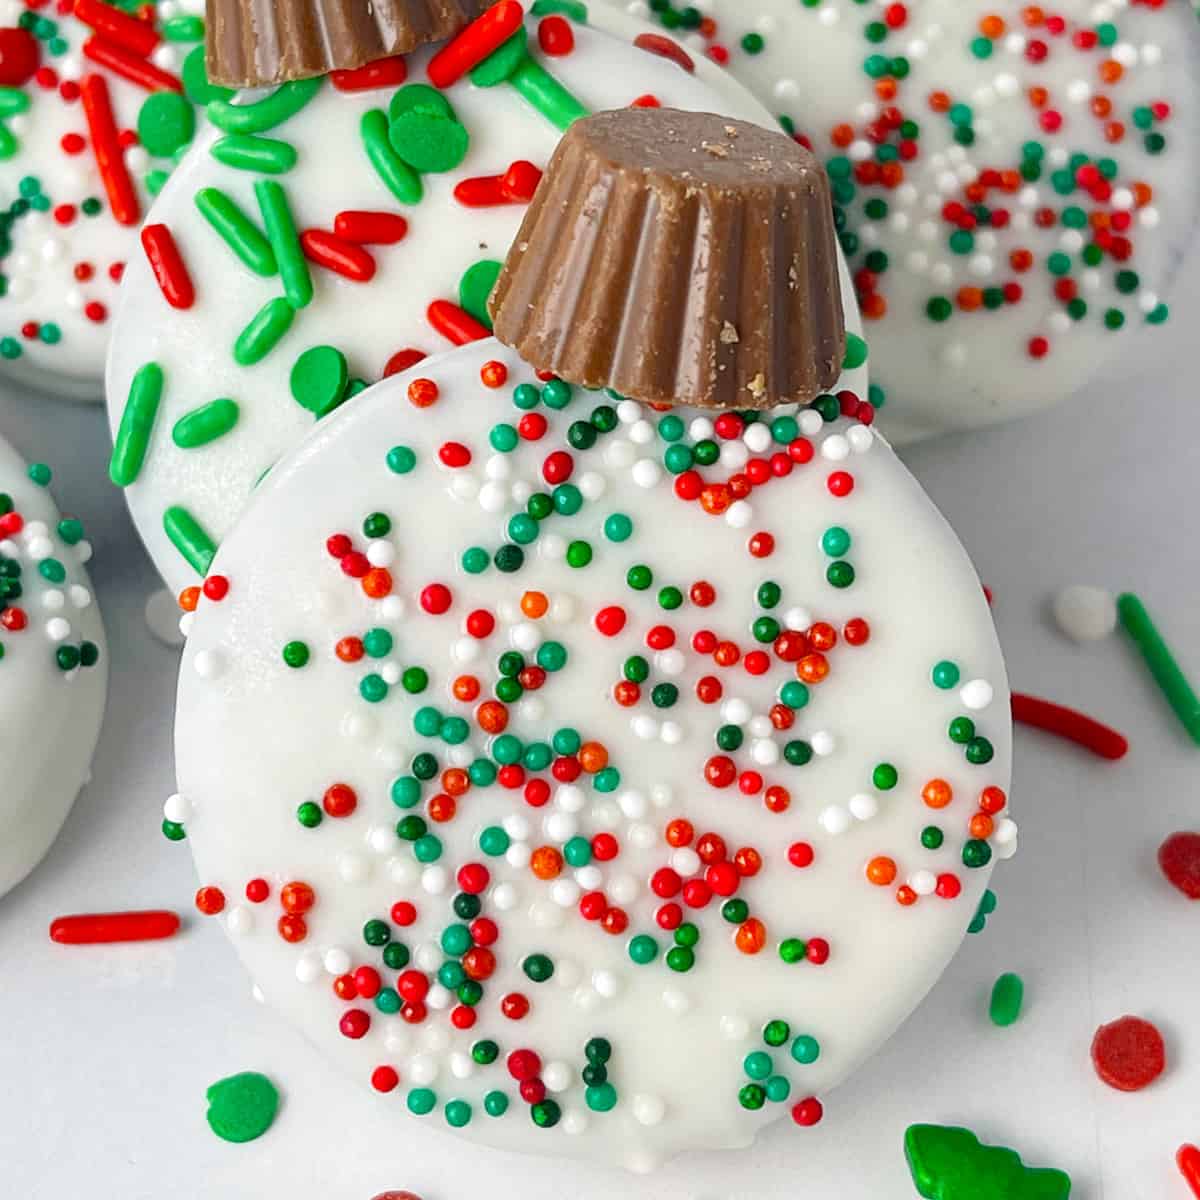 One oreo cookie dipped in white chocolate candy melts and decorated like an ornament.